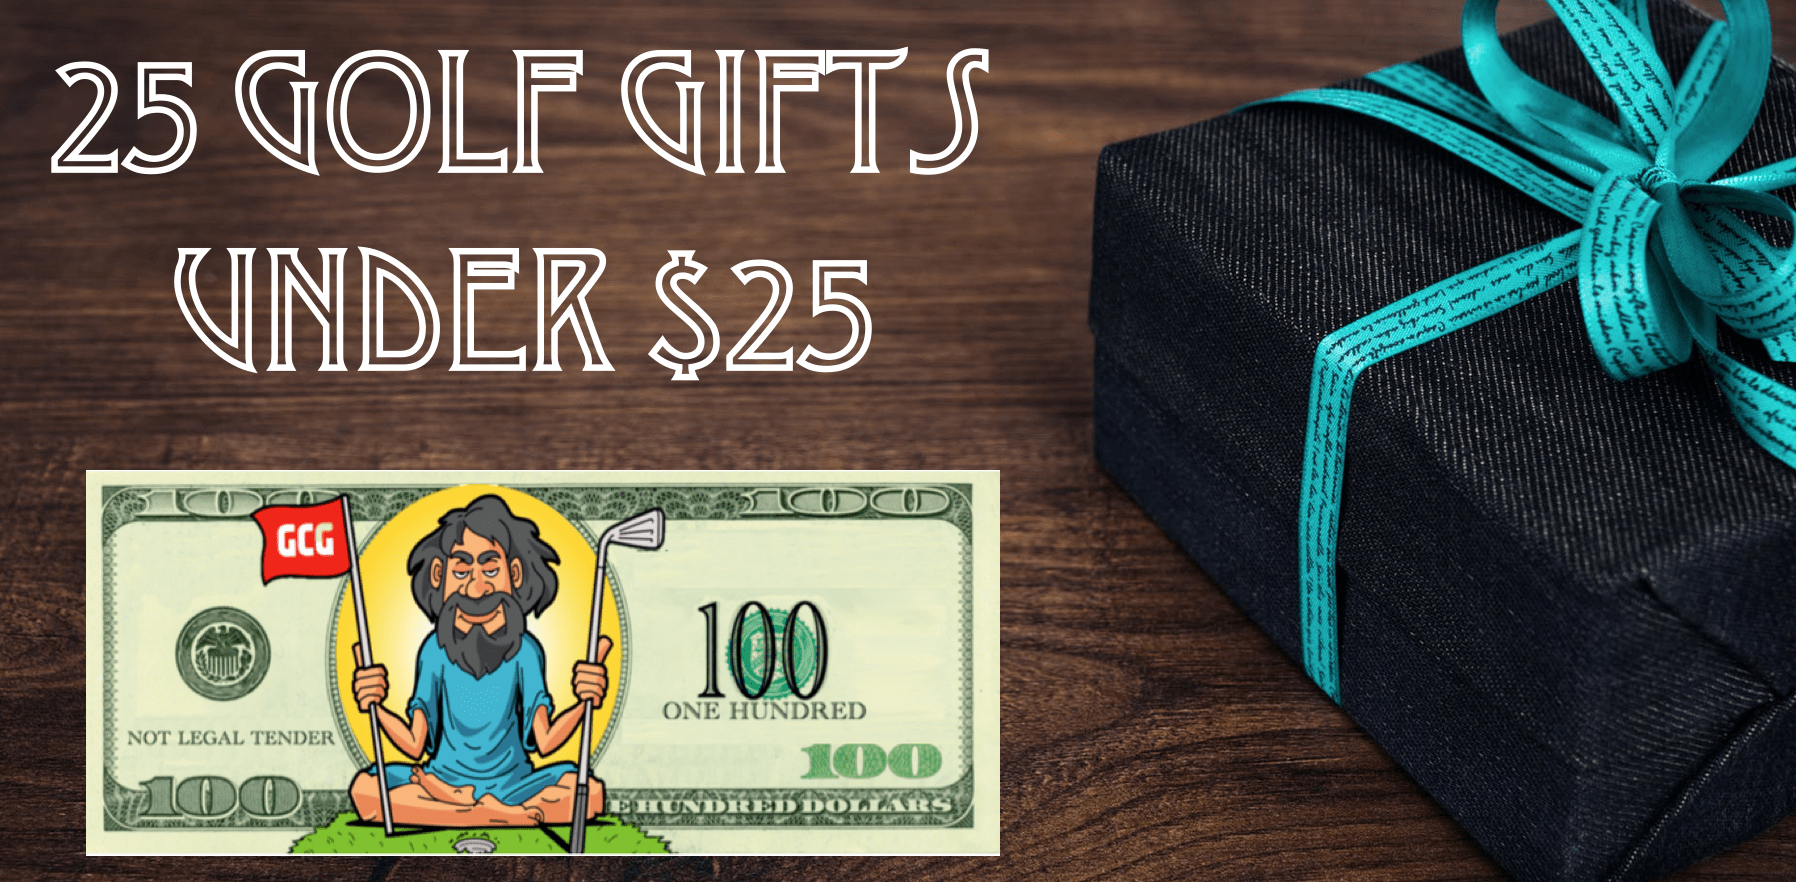 Best Gifts for Golfers Under